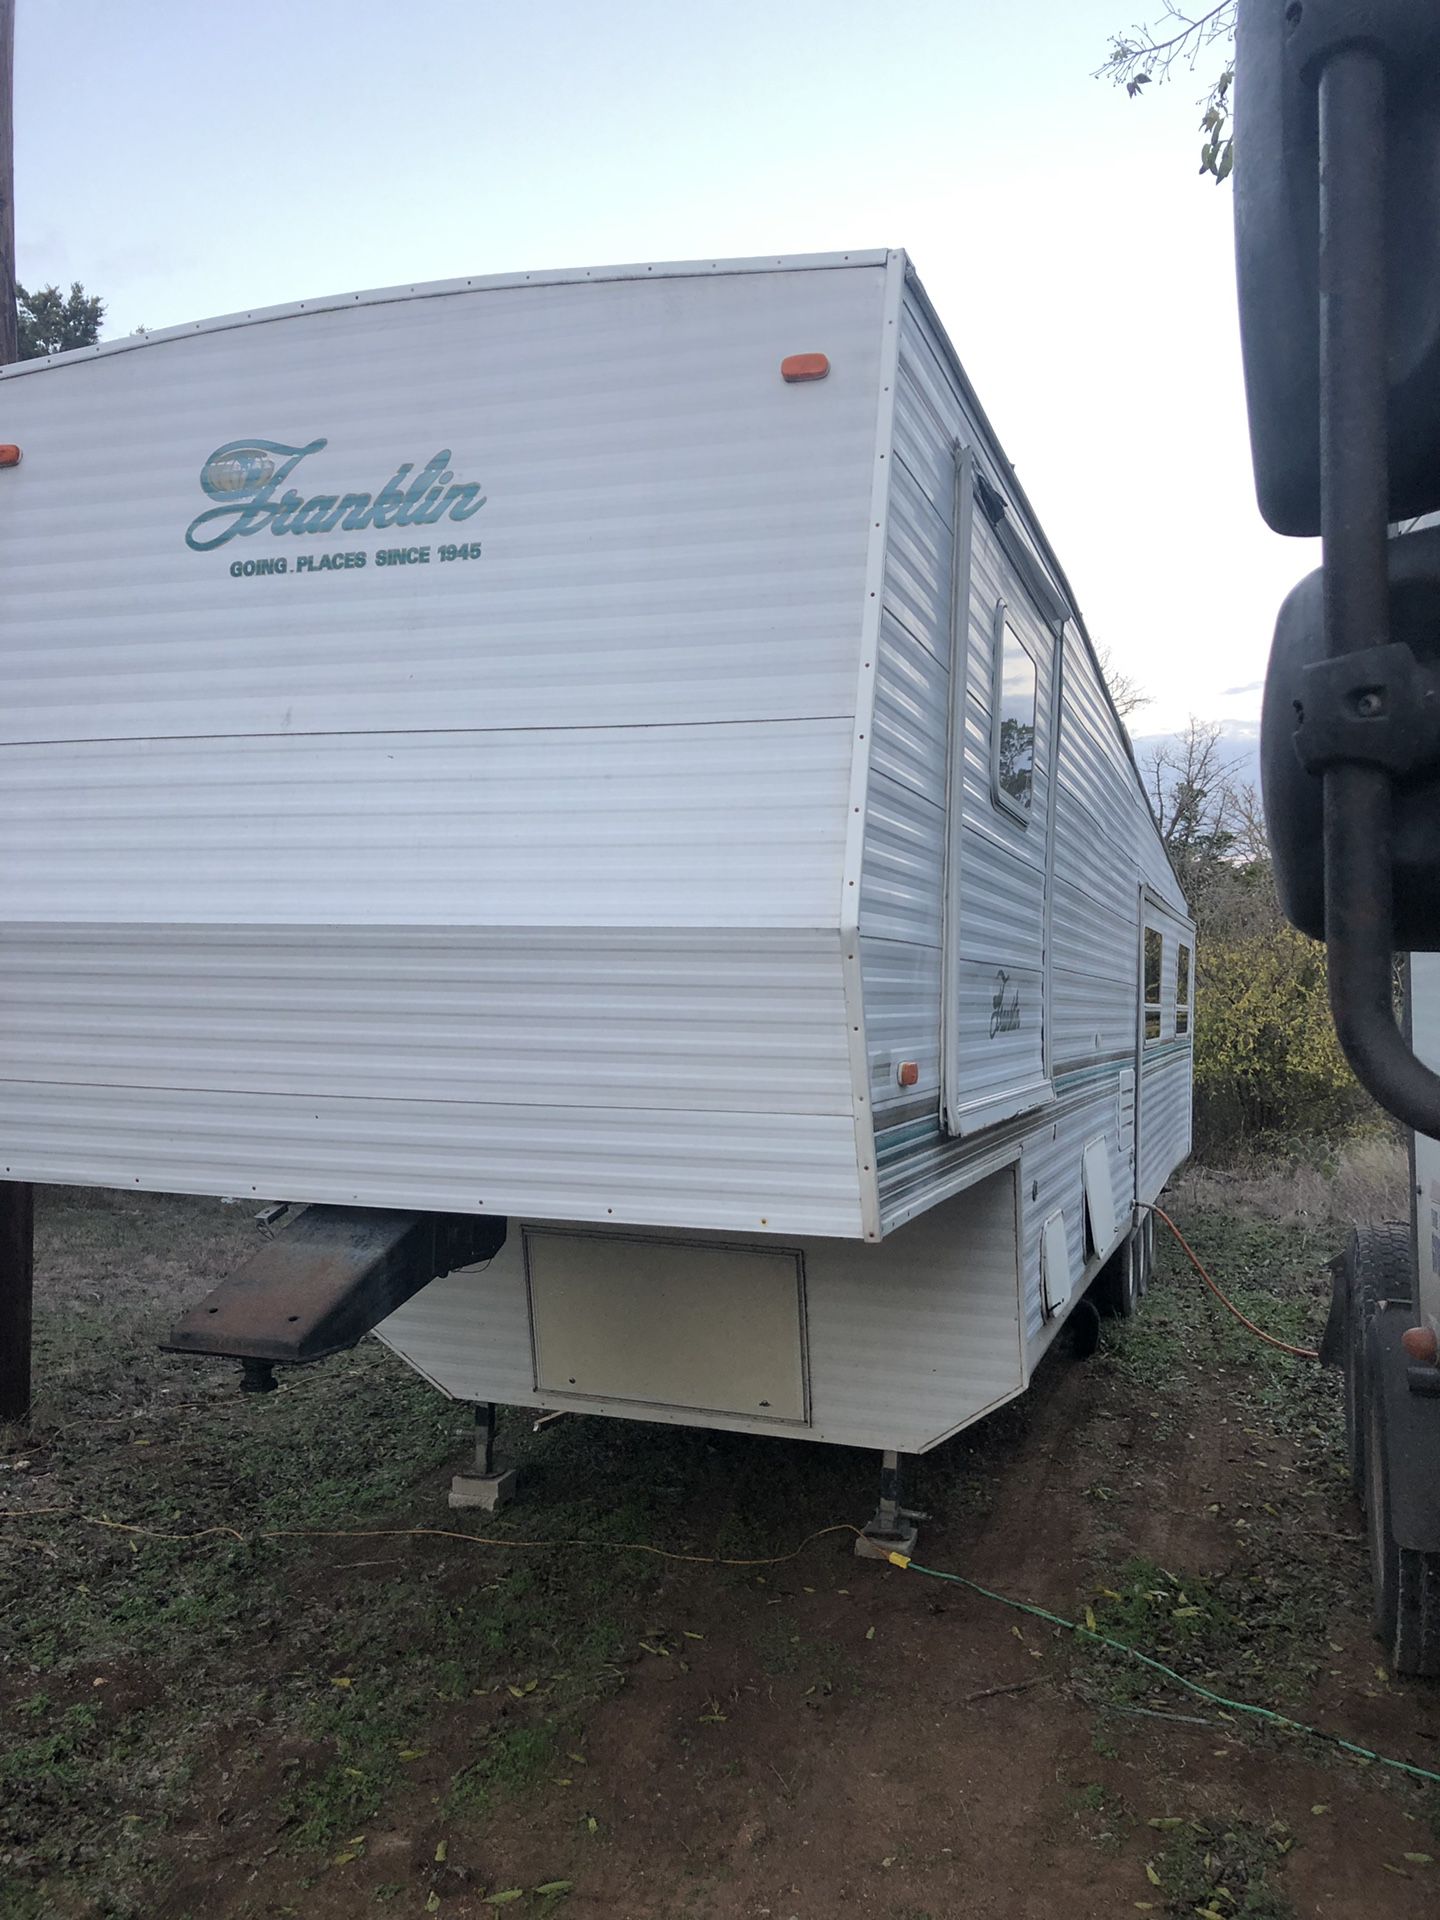 Franklin travel trailer for Sale in San Marcos, TX - OfferUp